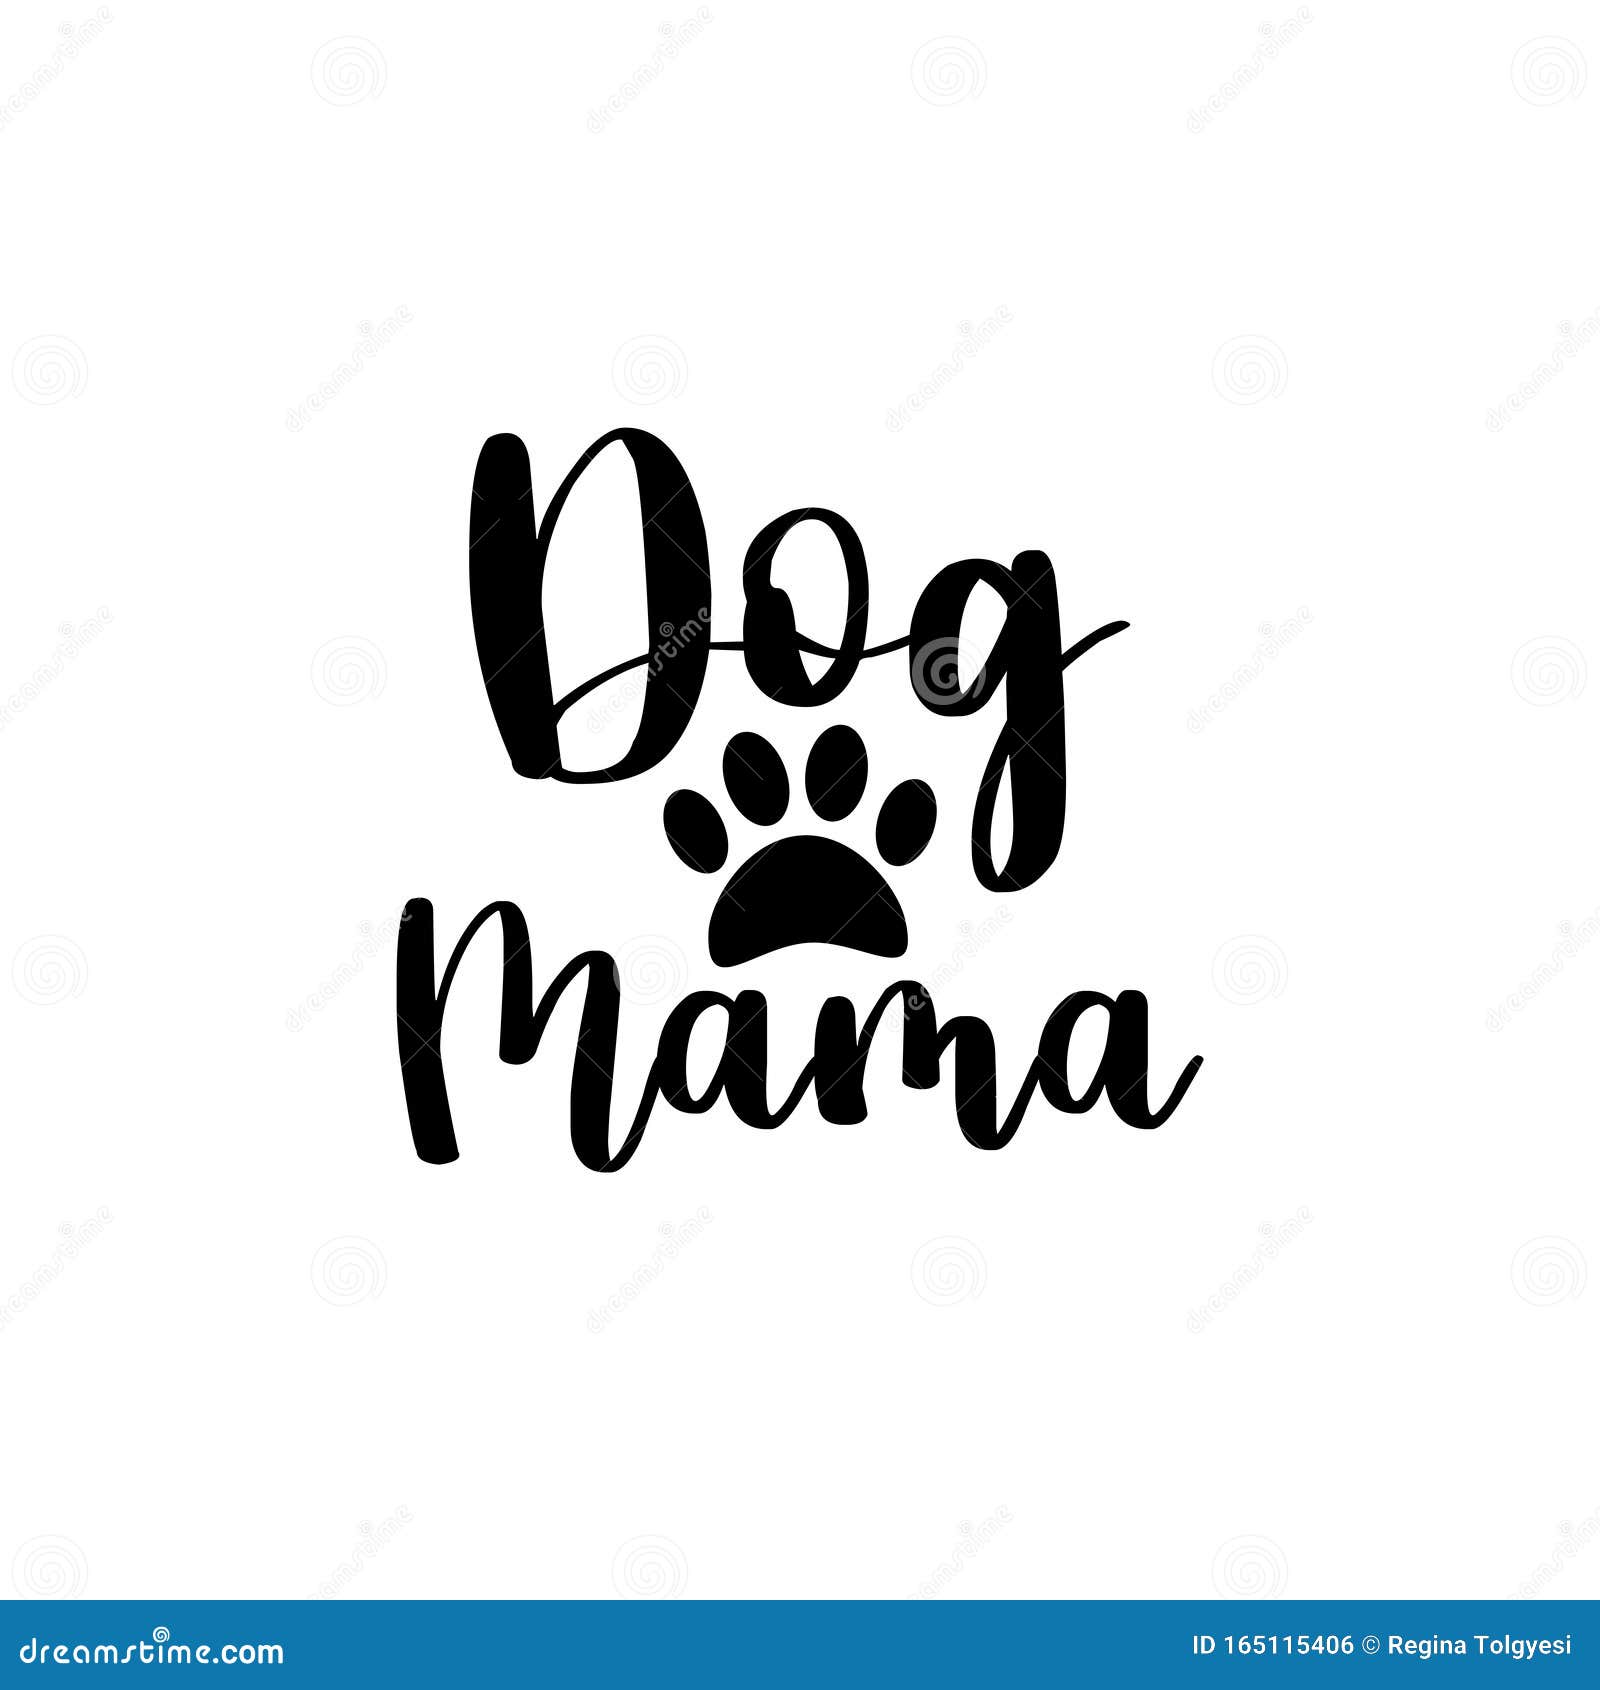 dog mama- text with paw sihouette.